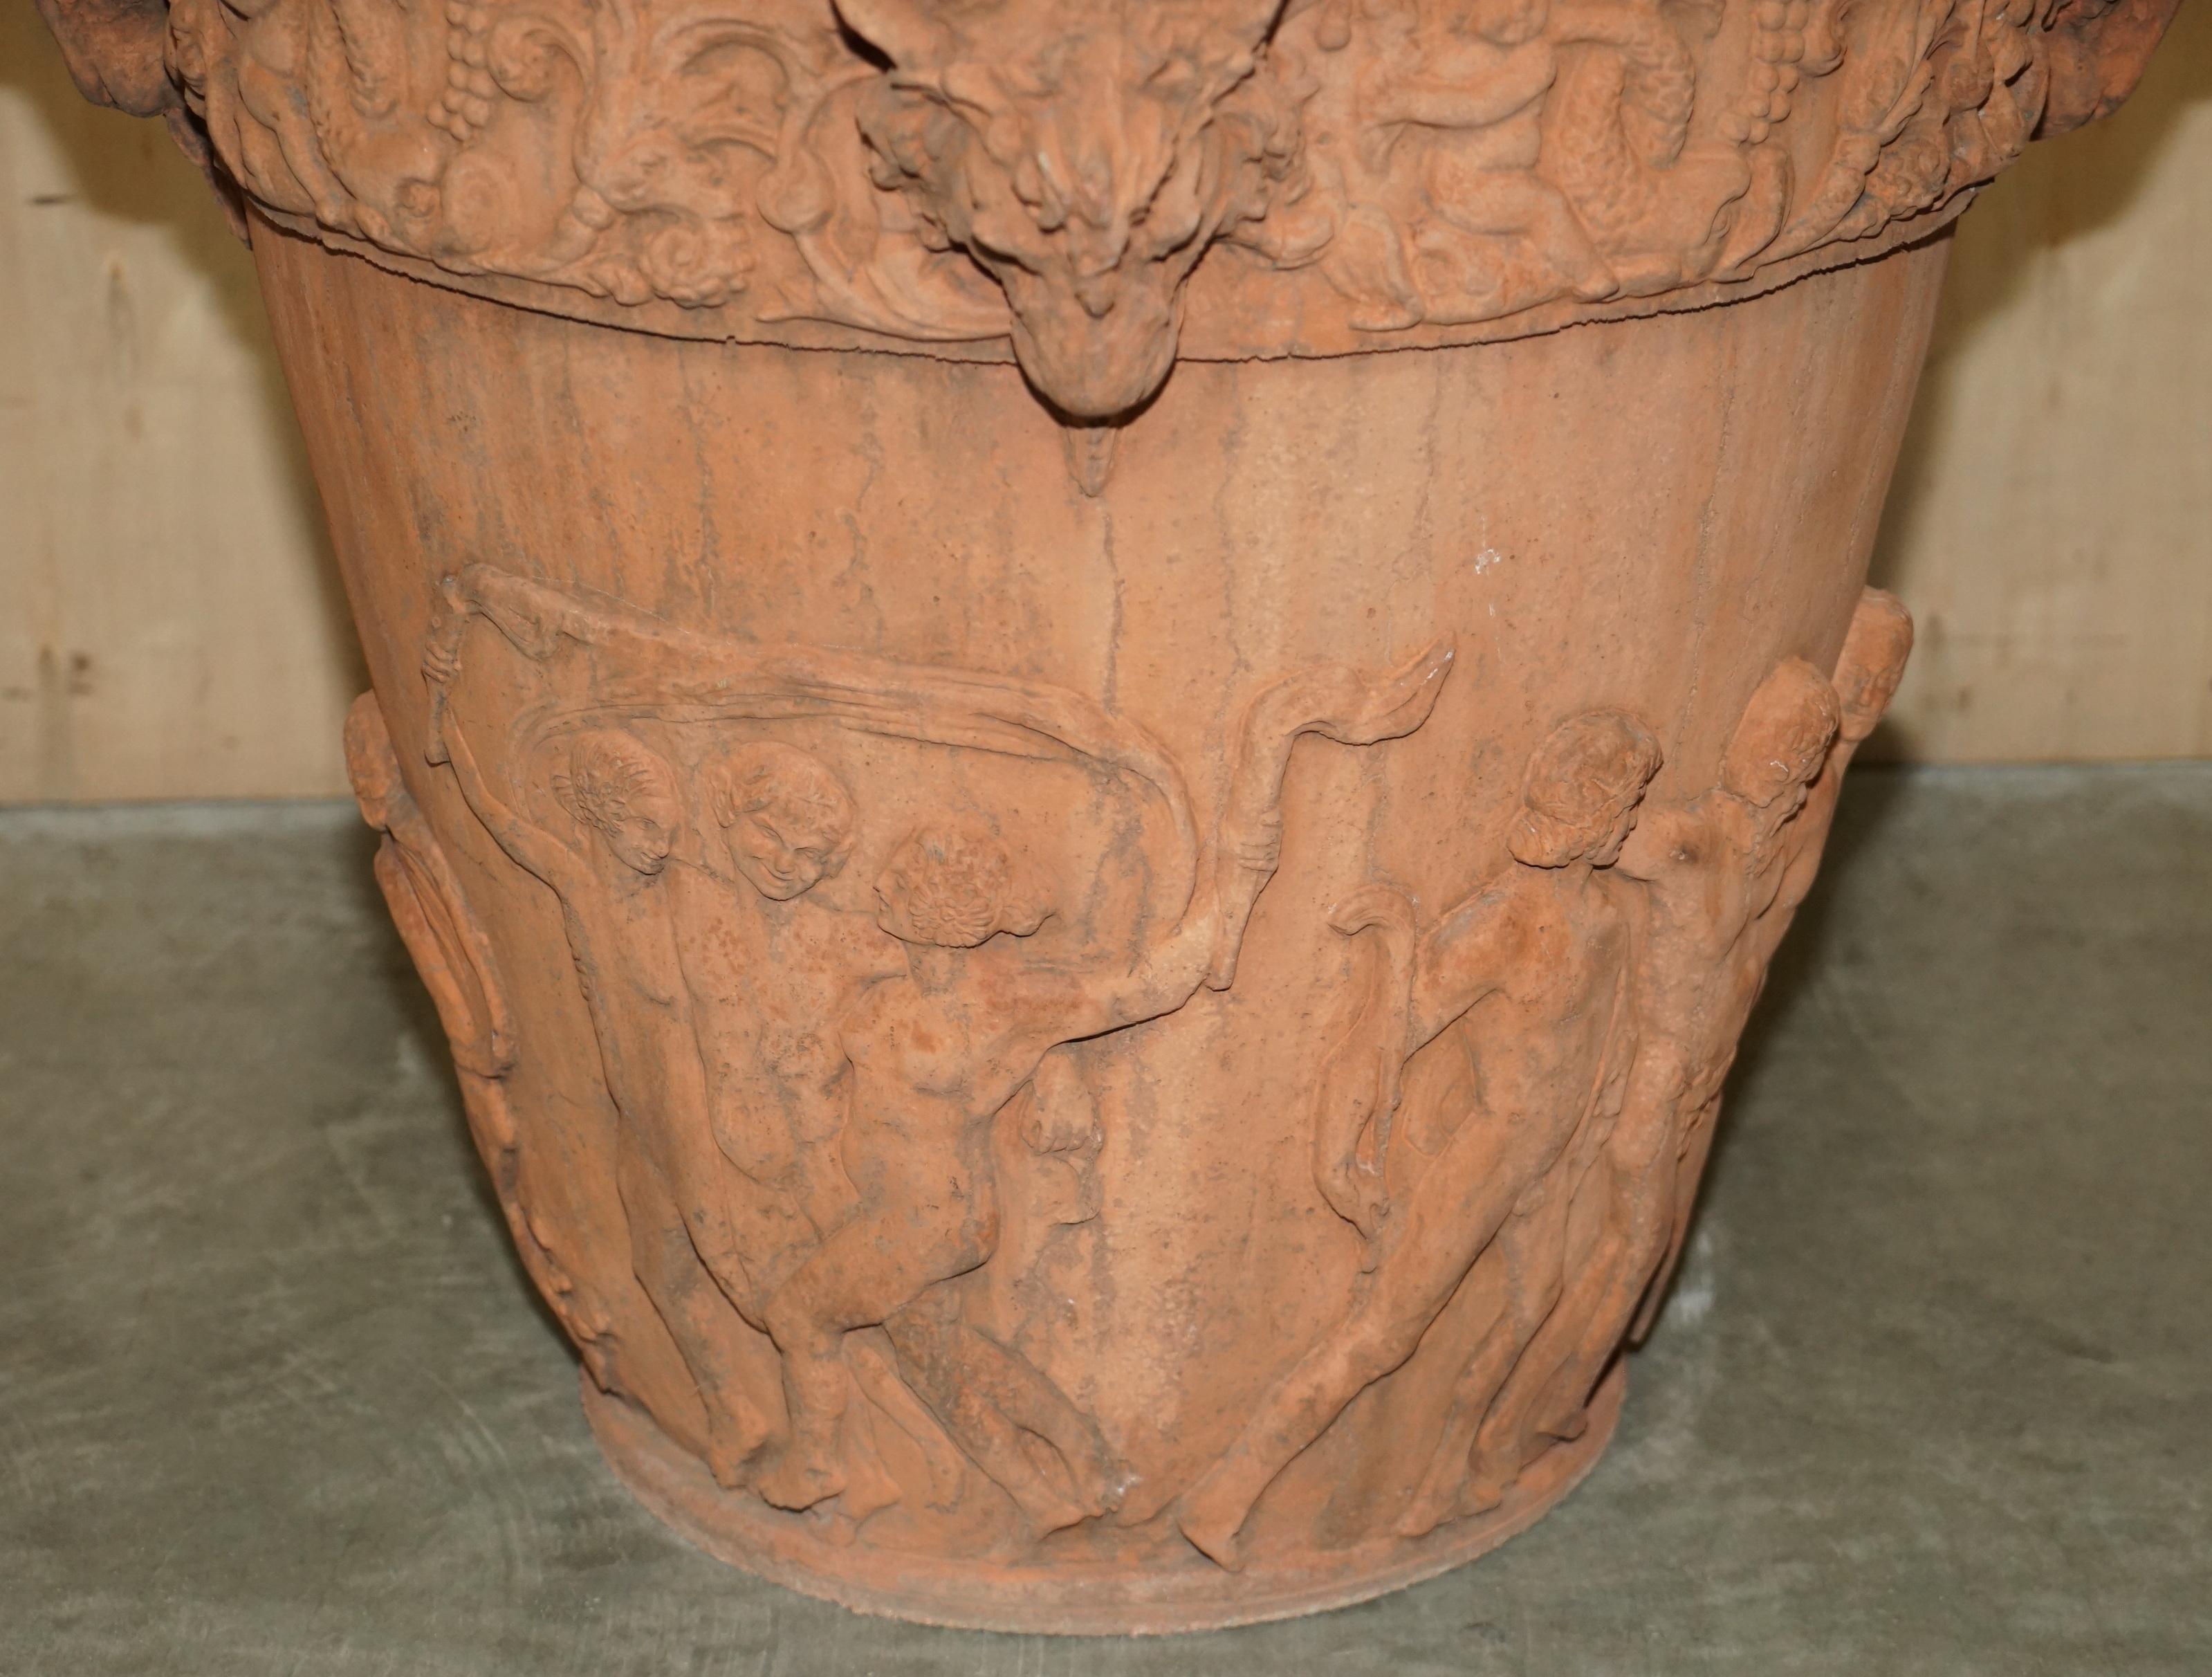 Hand-Crafted LARGE ANTIQUE RAMS HEAD & CHERUB PUTTI TERRACOTTA PLANTER 69CM HiGH 85CM WIDE For Sale